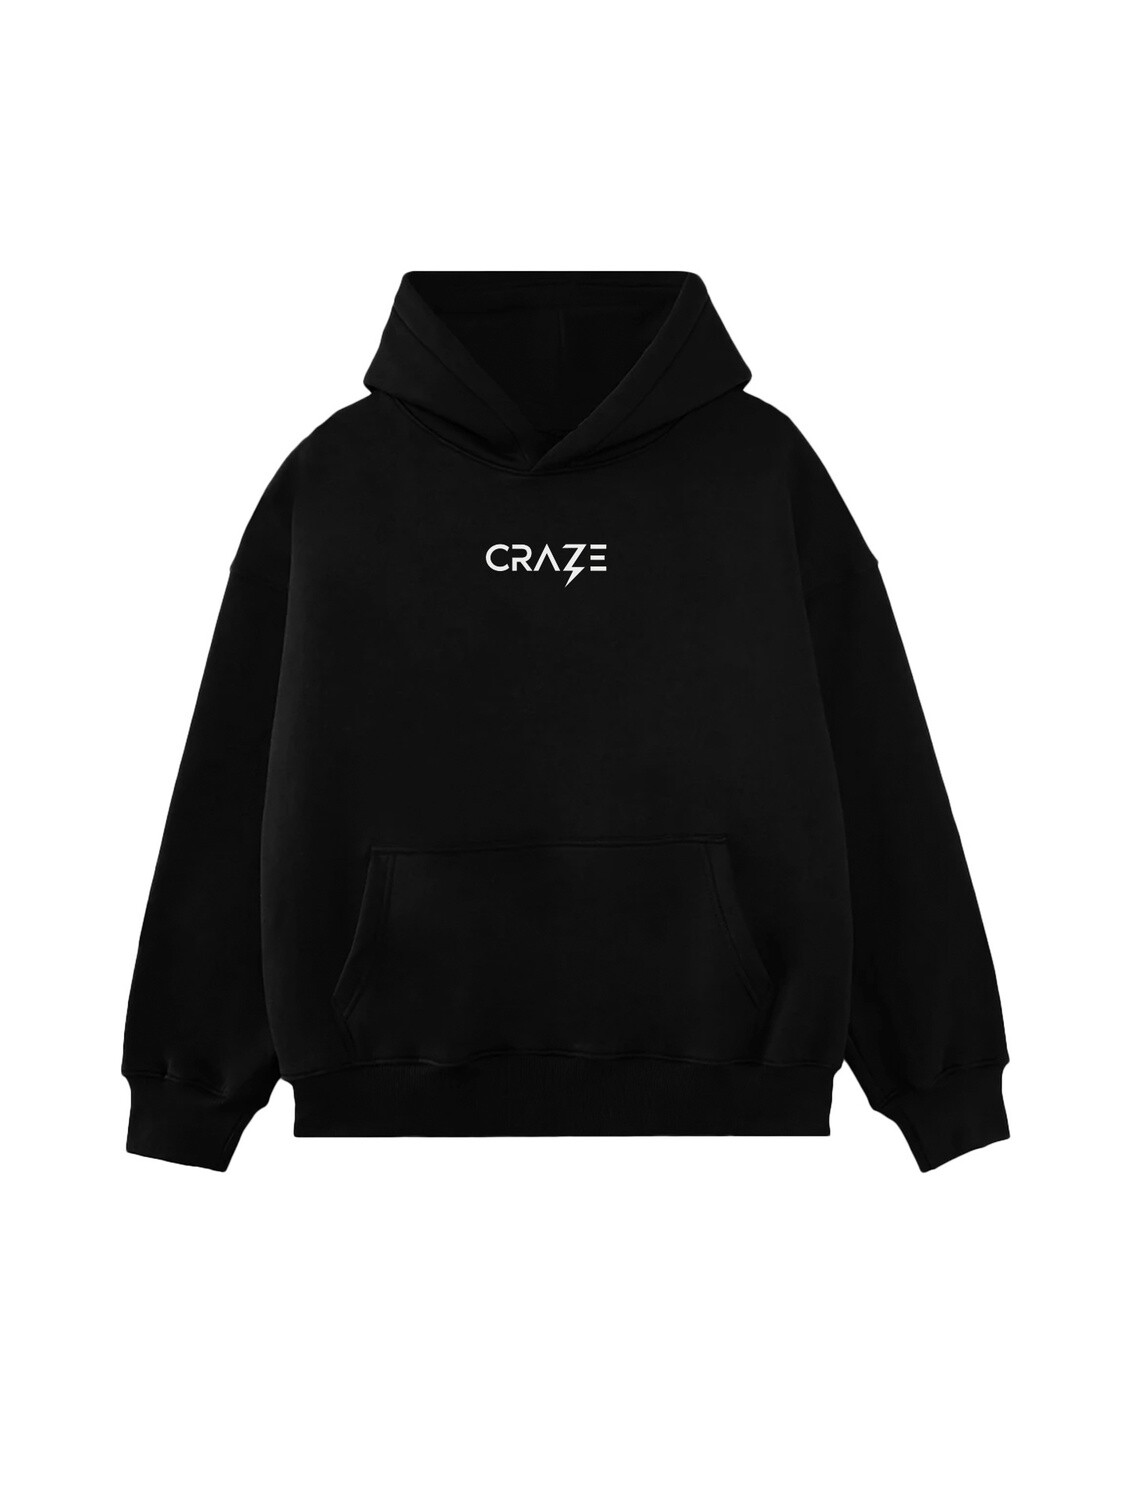 Hoodie Craze by Farfadet, Colour: Black, Size: Small